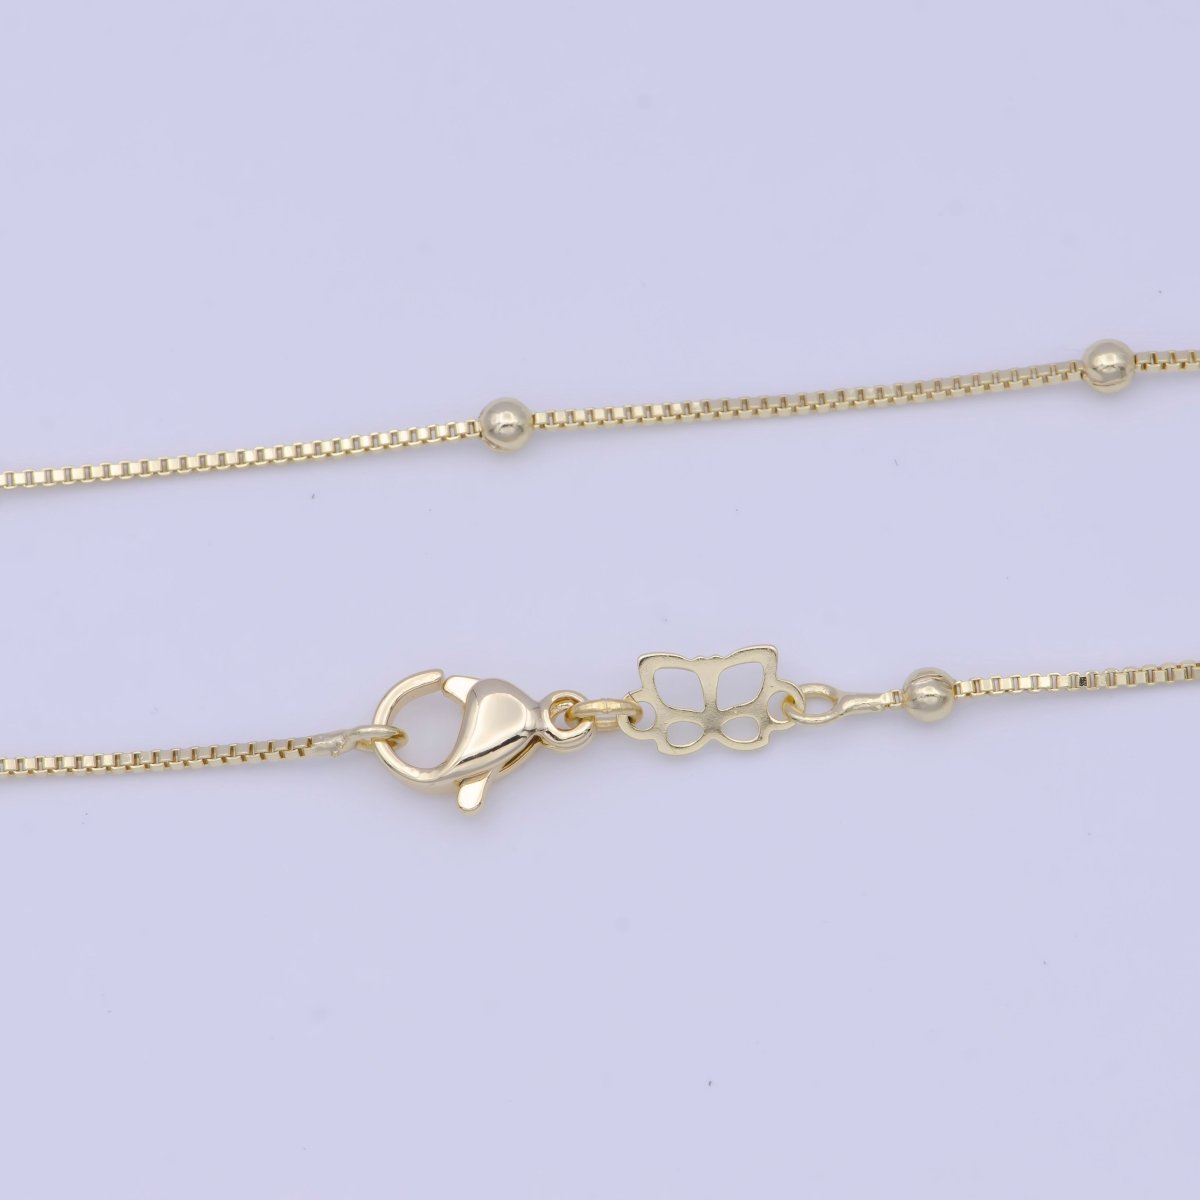 Fine Satellite Chain 18" Ready to Wear 14k Gold Filled Box Chain with Lobster Clasp, Simple Everyday Layering Necklace | WA-1108 Clearance Pricing - DLUXCA